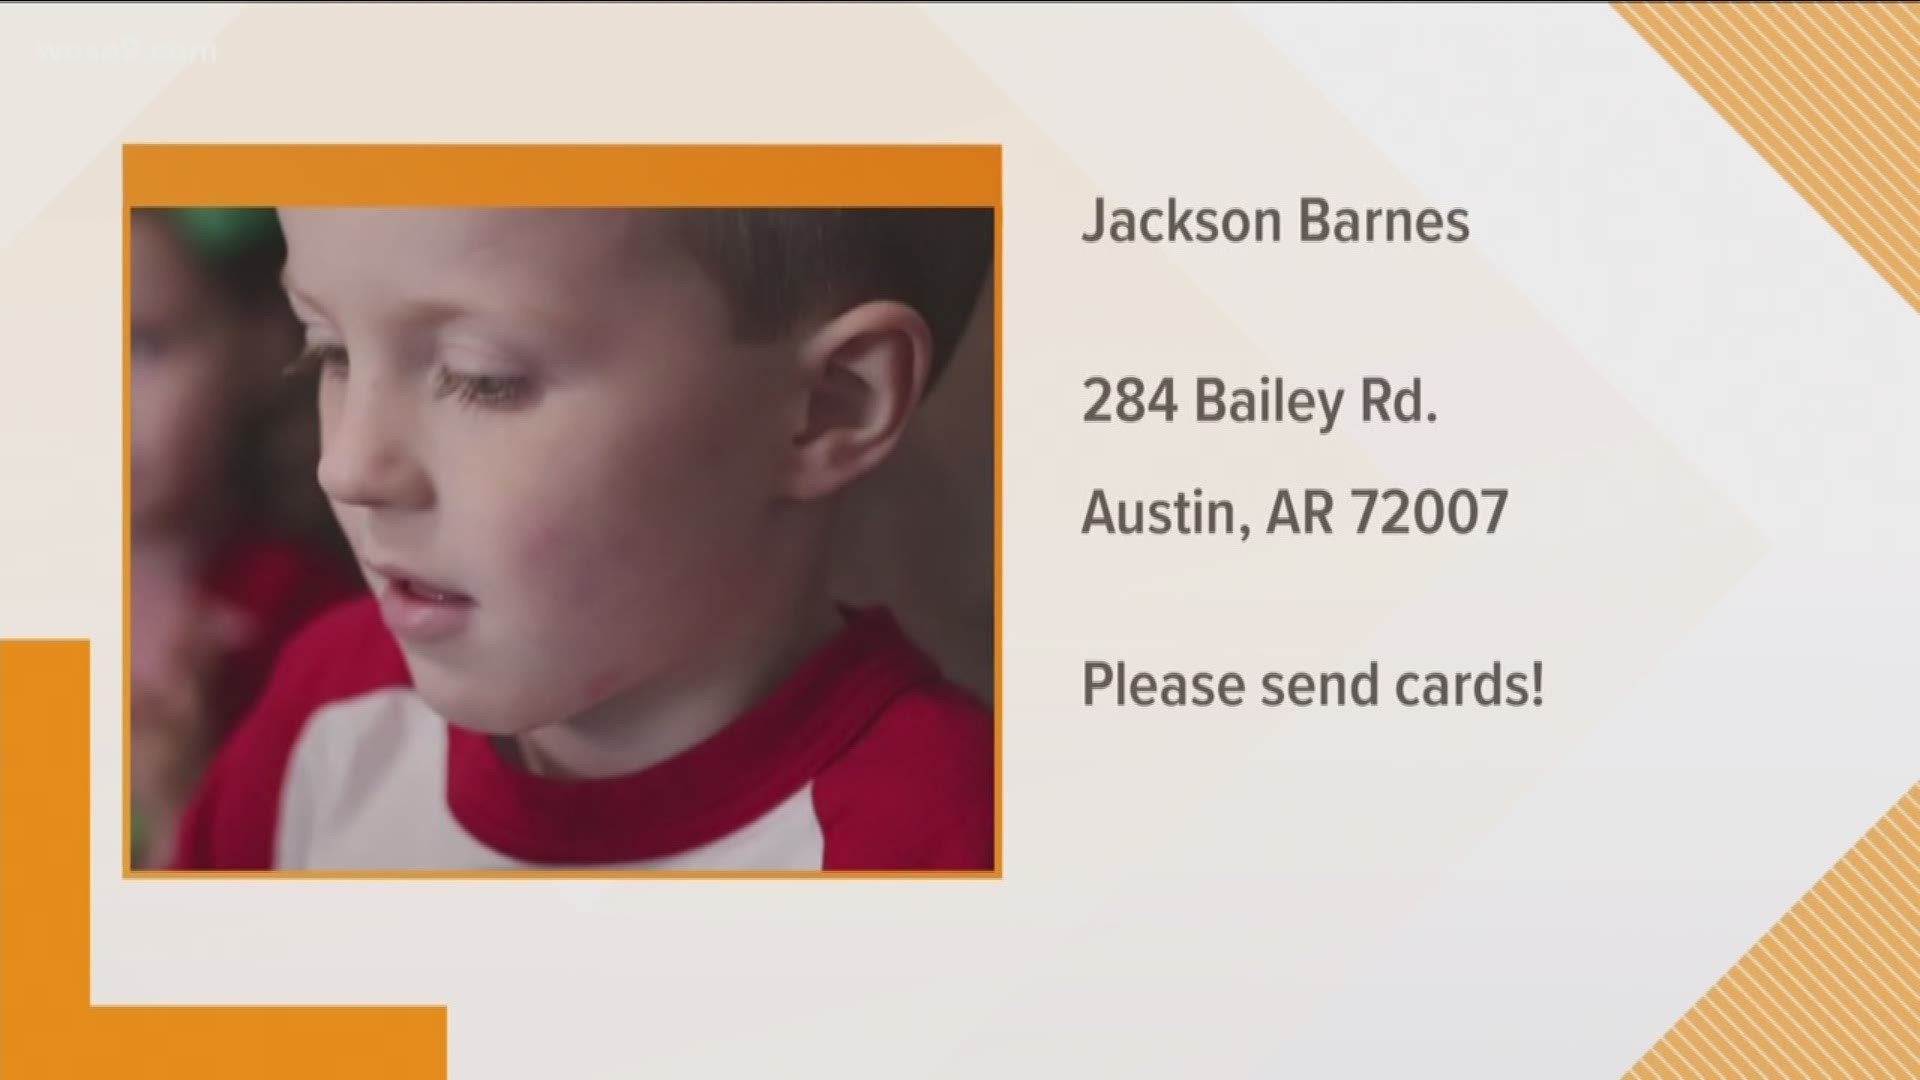 Jackson has been diagnosed with Battens Disease. He's already lost his sight, and will eventually be wheelchair bound. All he wants is cards from across the globe.